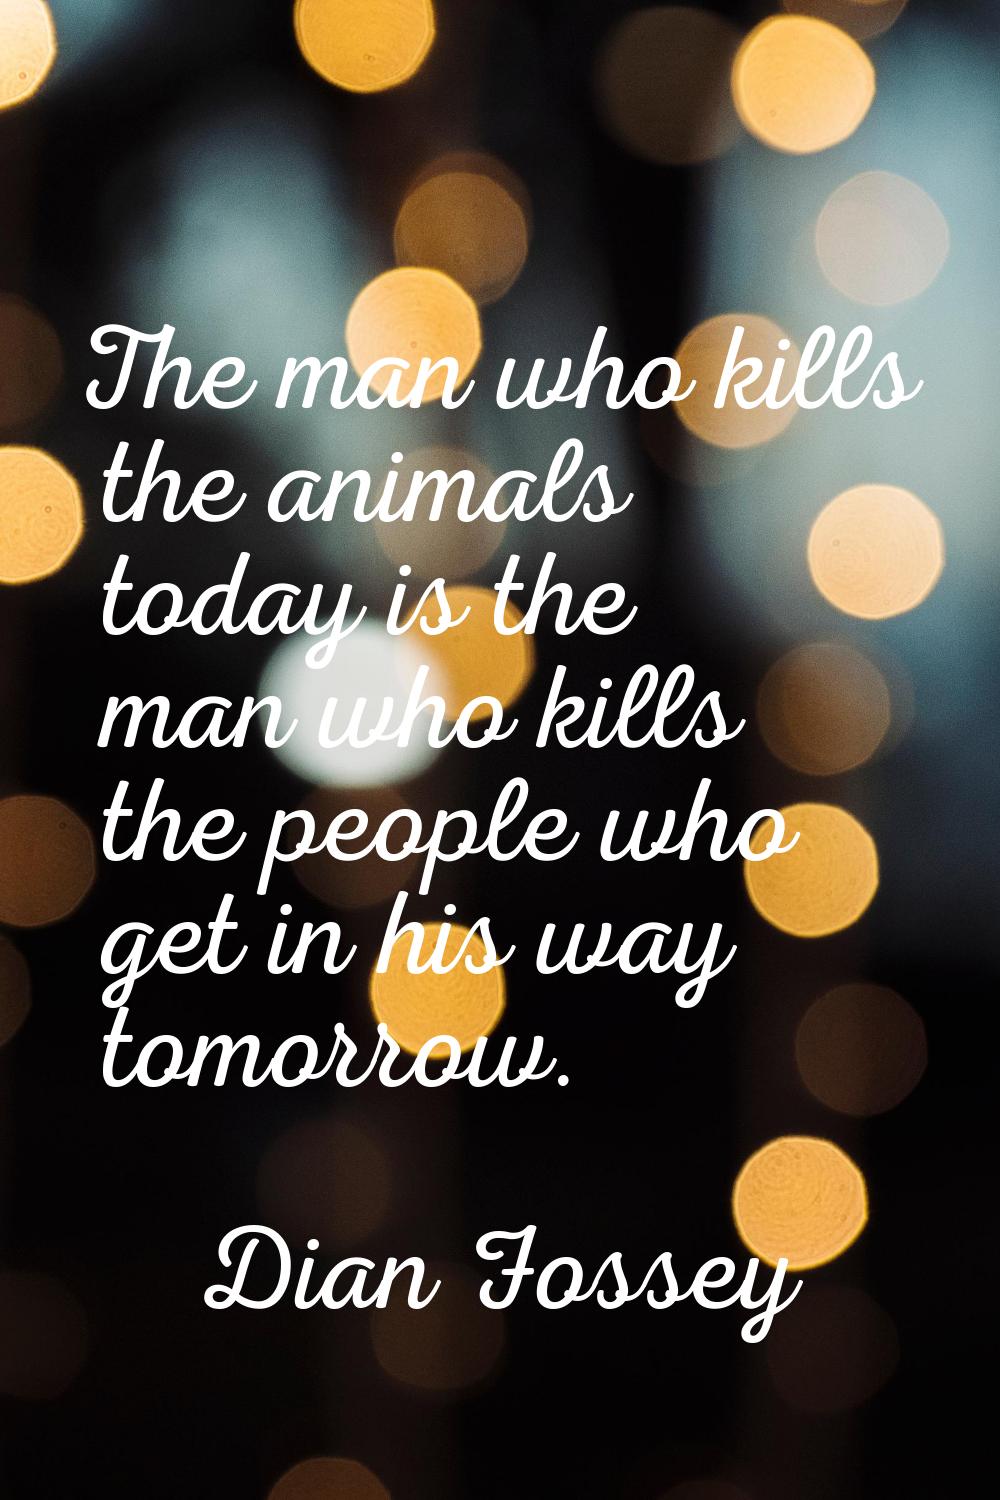 The man who kills the animals today is the man who kills the people who get in his way tomorrow.